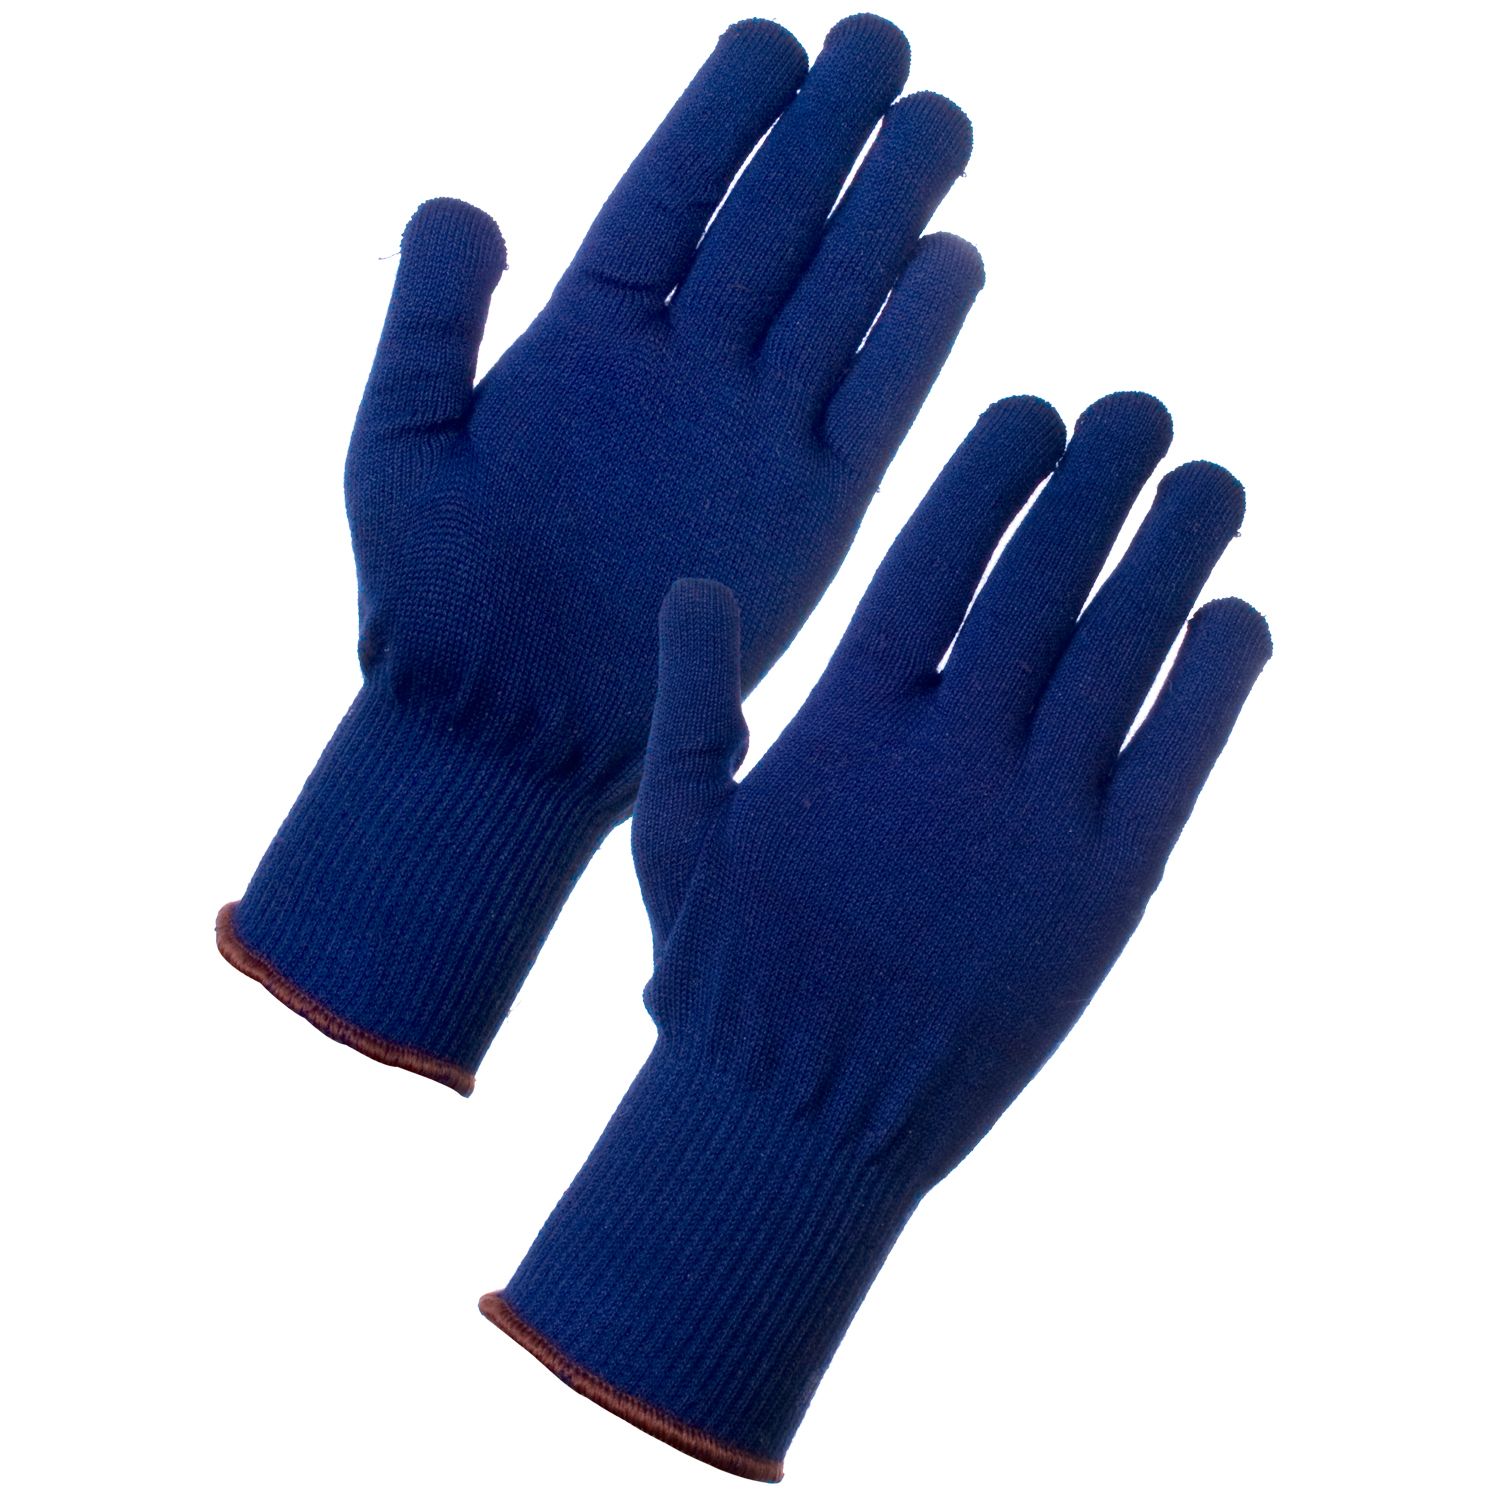 Superthermal Warming Gloves with Enhanced Grip